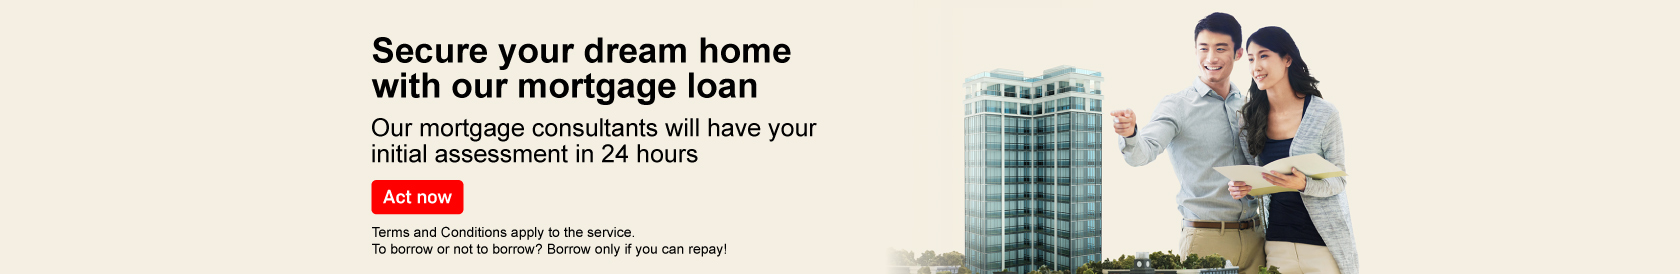 Secure your dream home with our mortgage loan